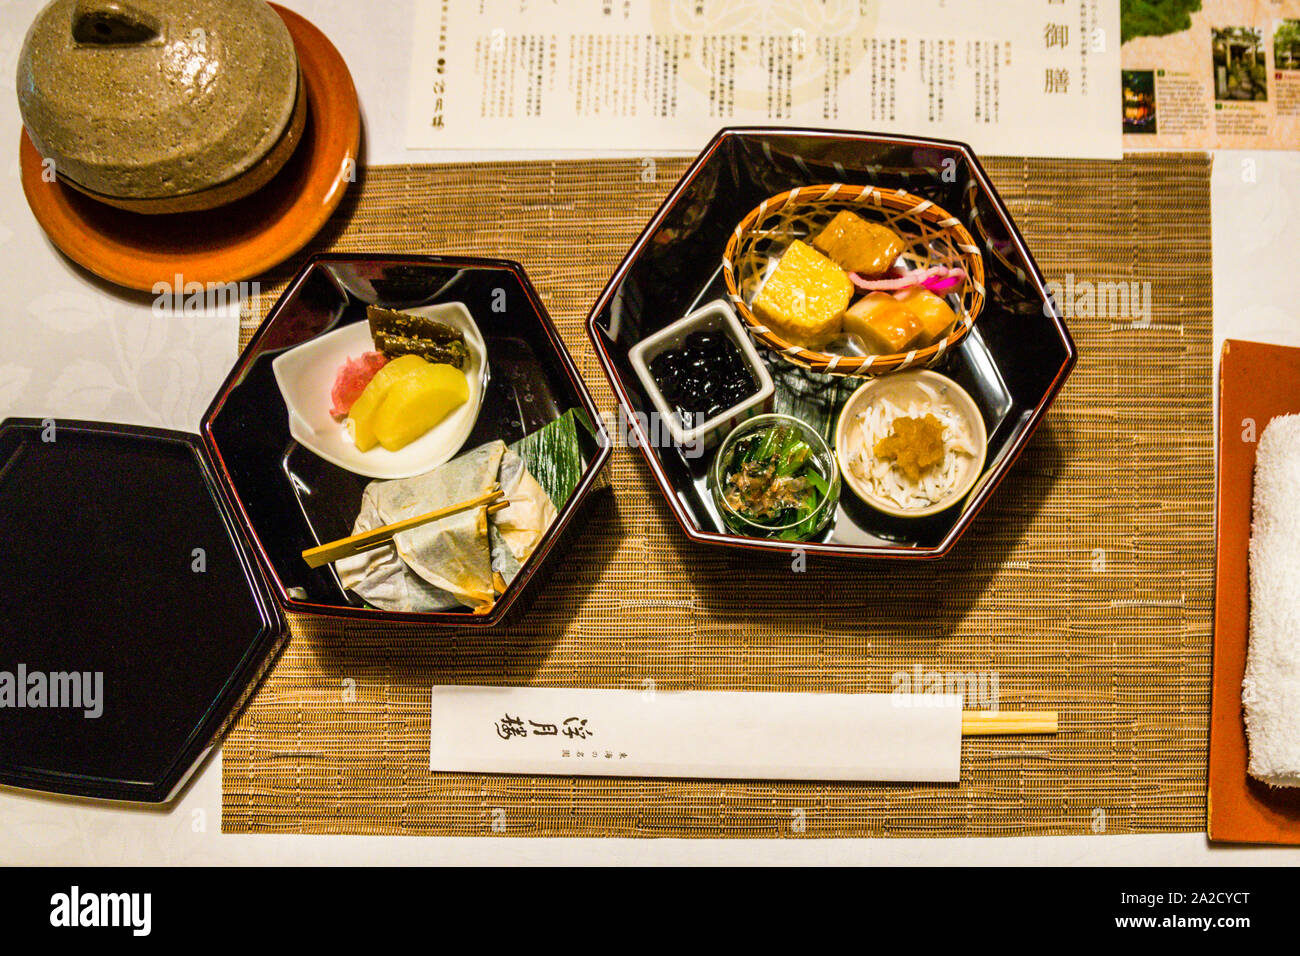 Japanese Dinner in the House of the last Shogun, Tokugawa Yoshinobu, in Shizuoka, Japan. Lunch at Fugetsuro with the favorite dishes of the last shogun: eggs, black beans and rice with bonito flakes Stock Photo